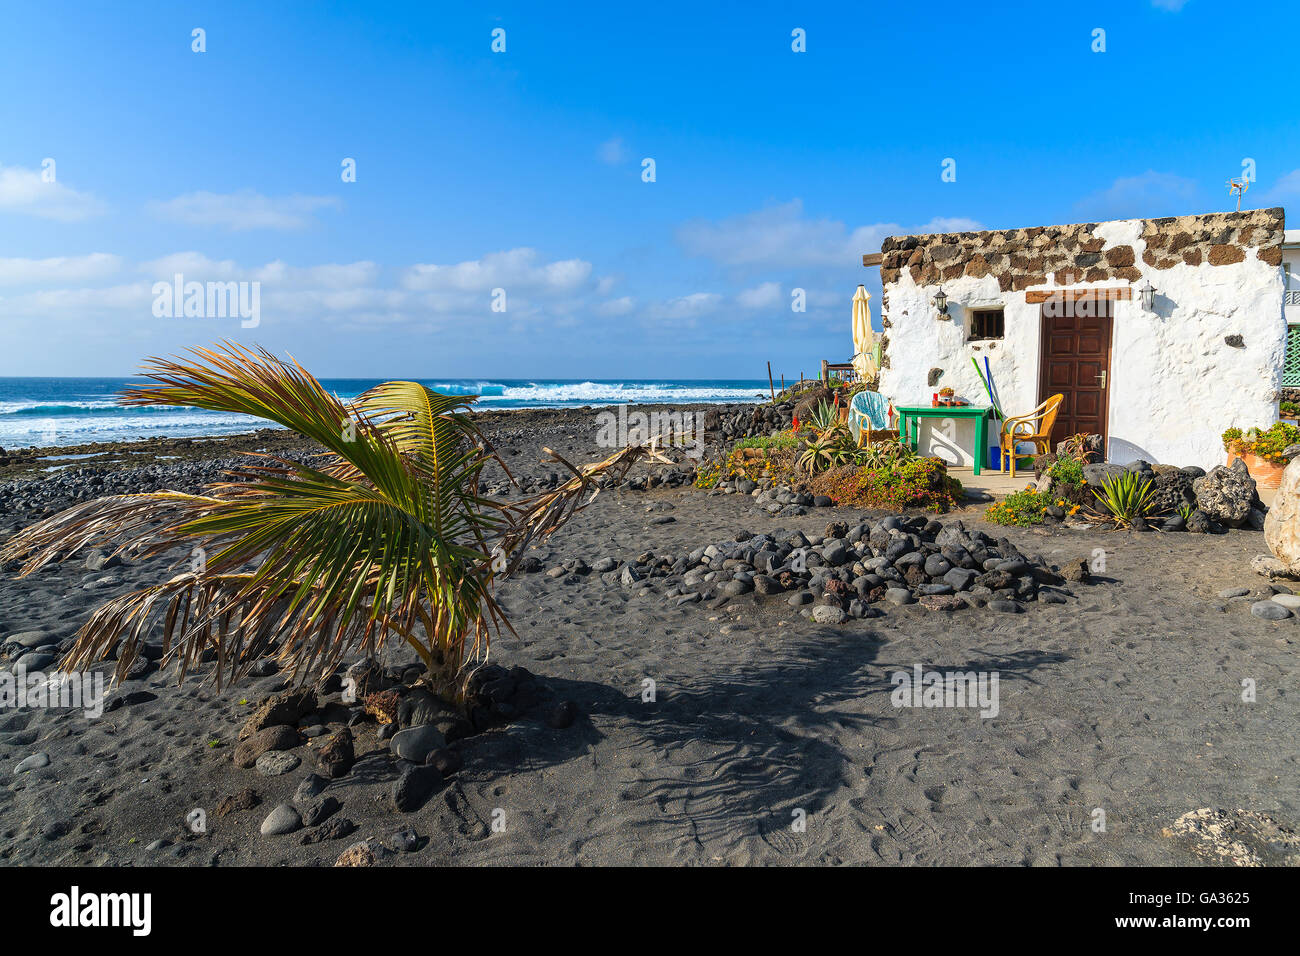 Typical Canarian house for tourists on El Golfo beach, Lanzarote island, Spain Stock Photo